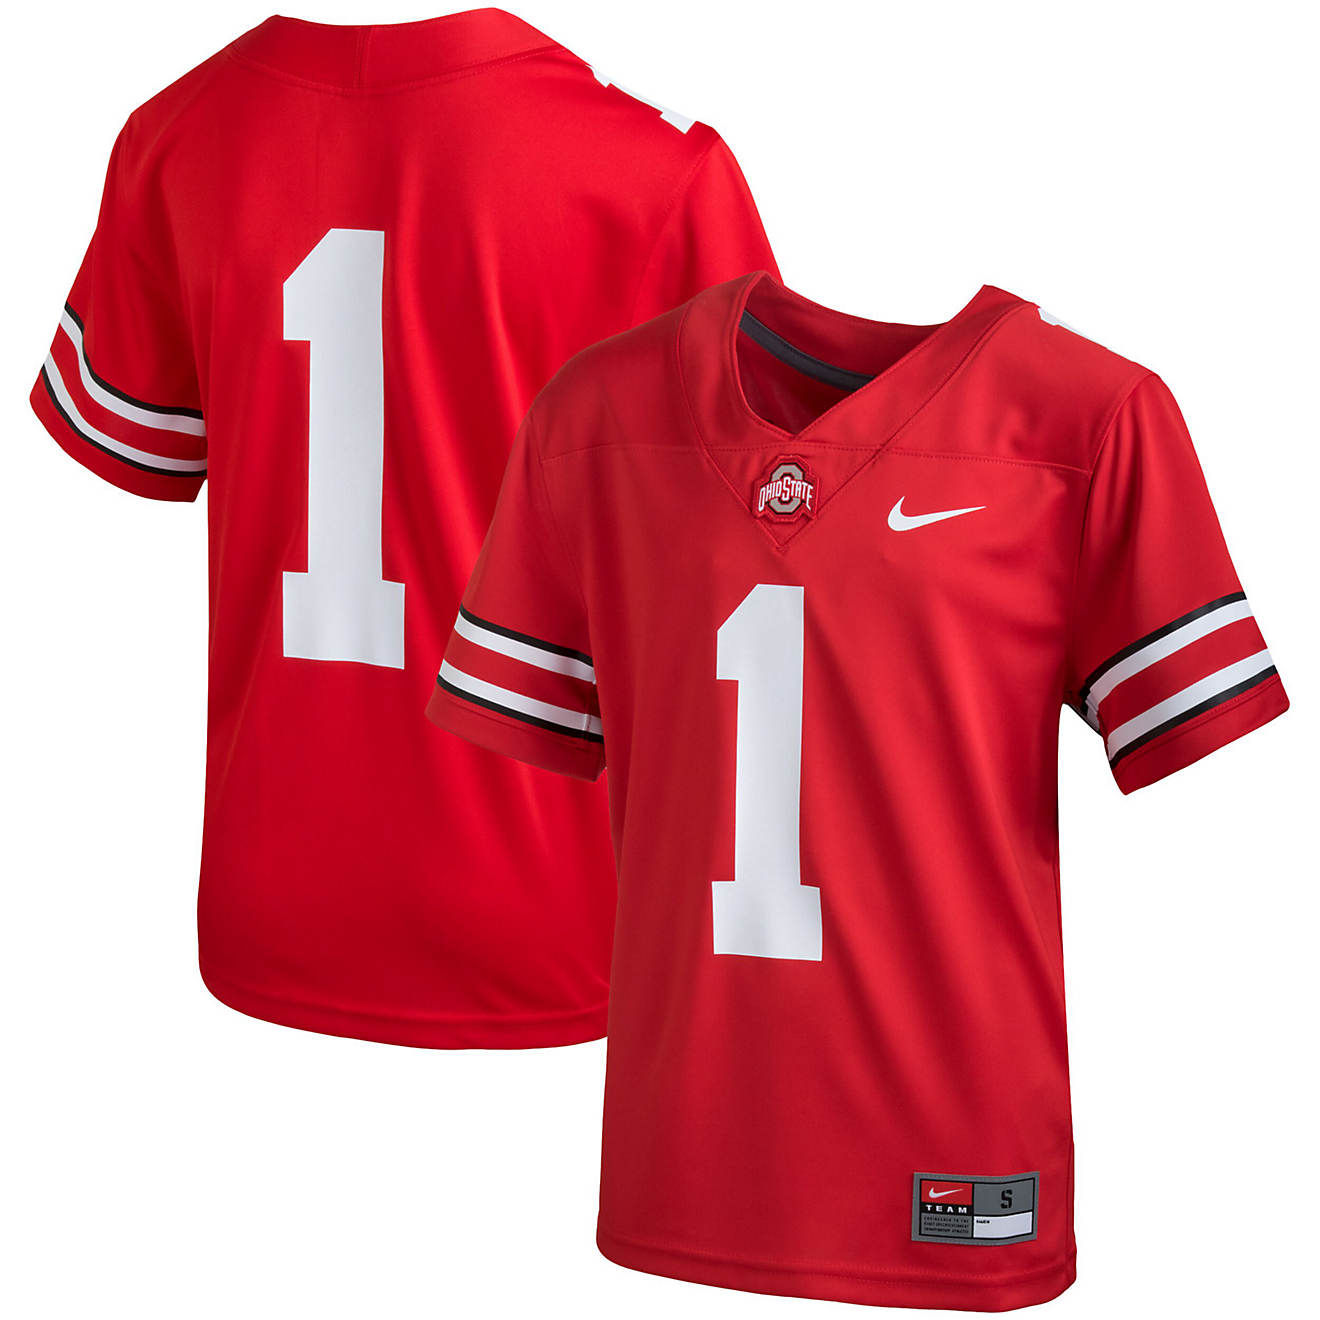 Youth Nike 1 Ohio State Buckeyes Team Replica Football Jersey                                                                    - view number 1